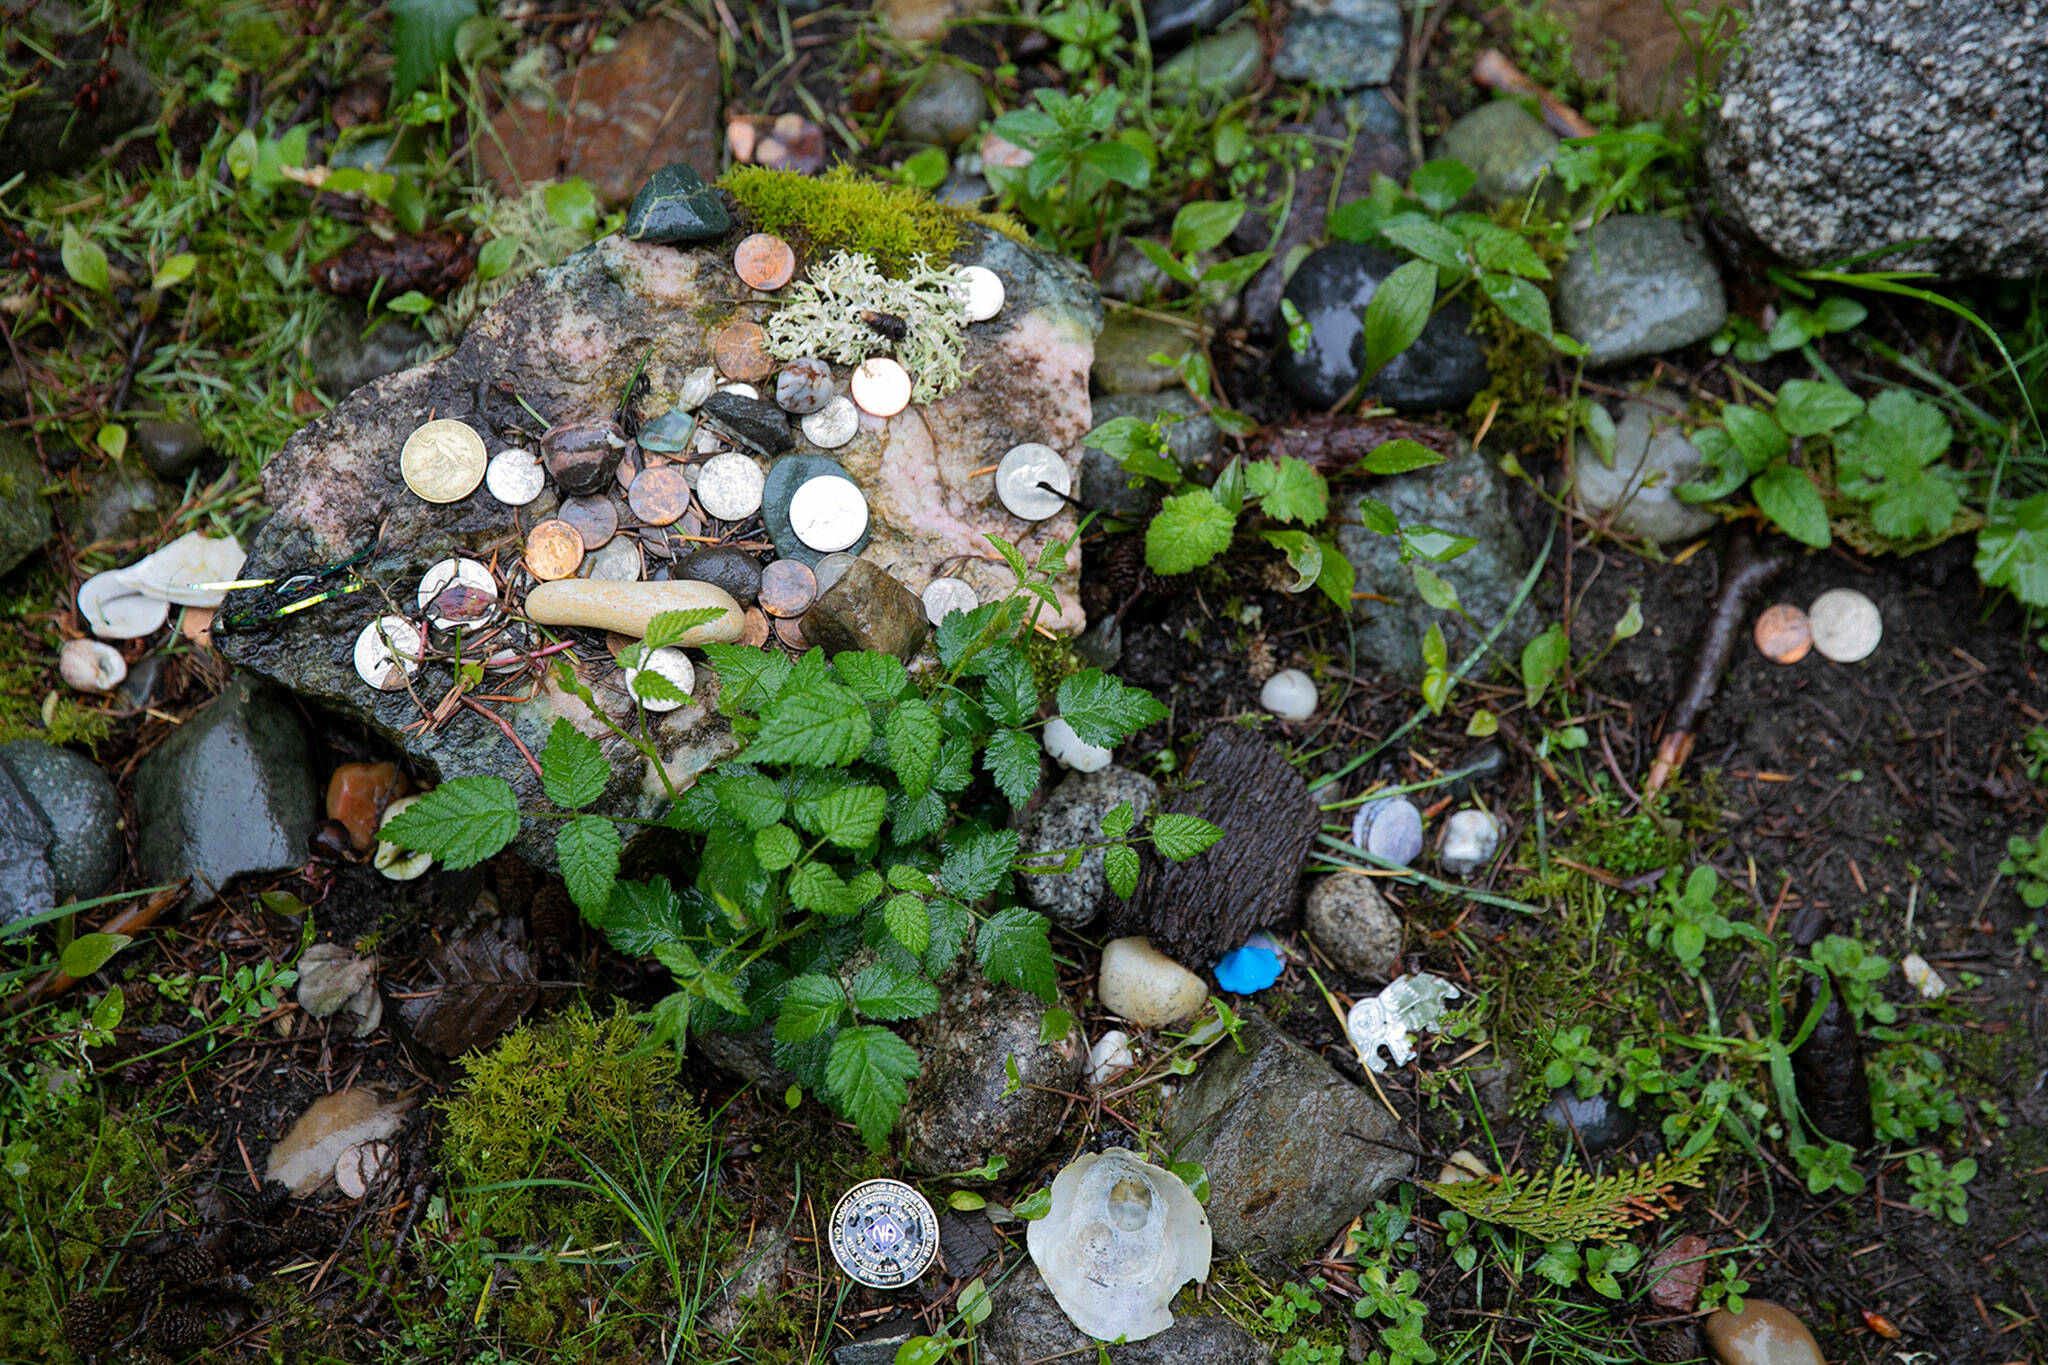 Coins and other offerings from guests are laid at the center of a stone circle at Earth Sanctuary. (Ryan Berry / The Herald)